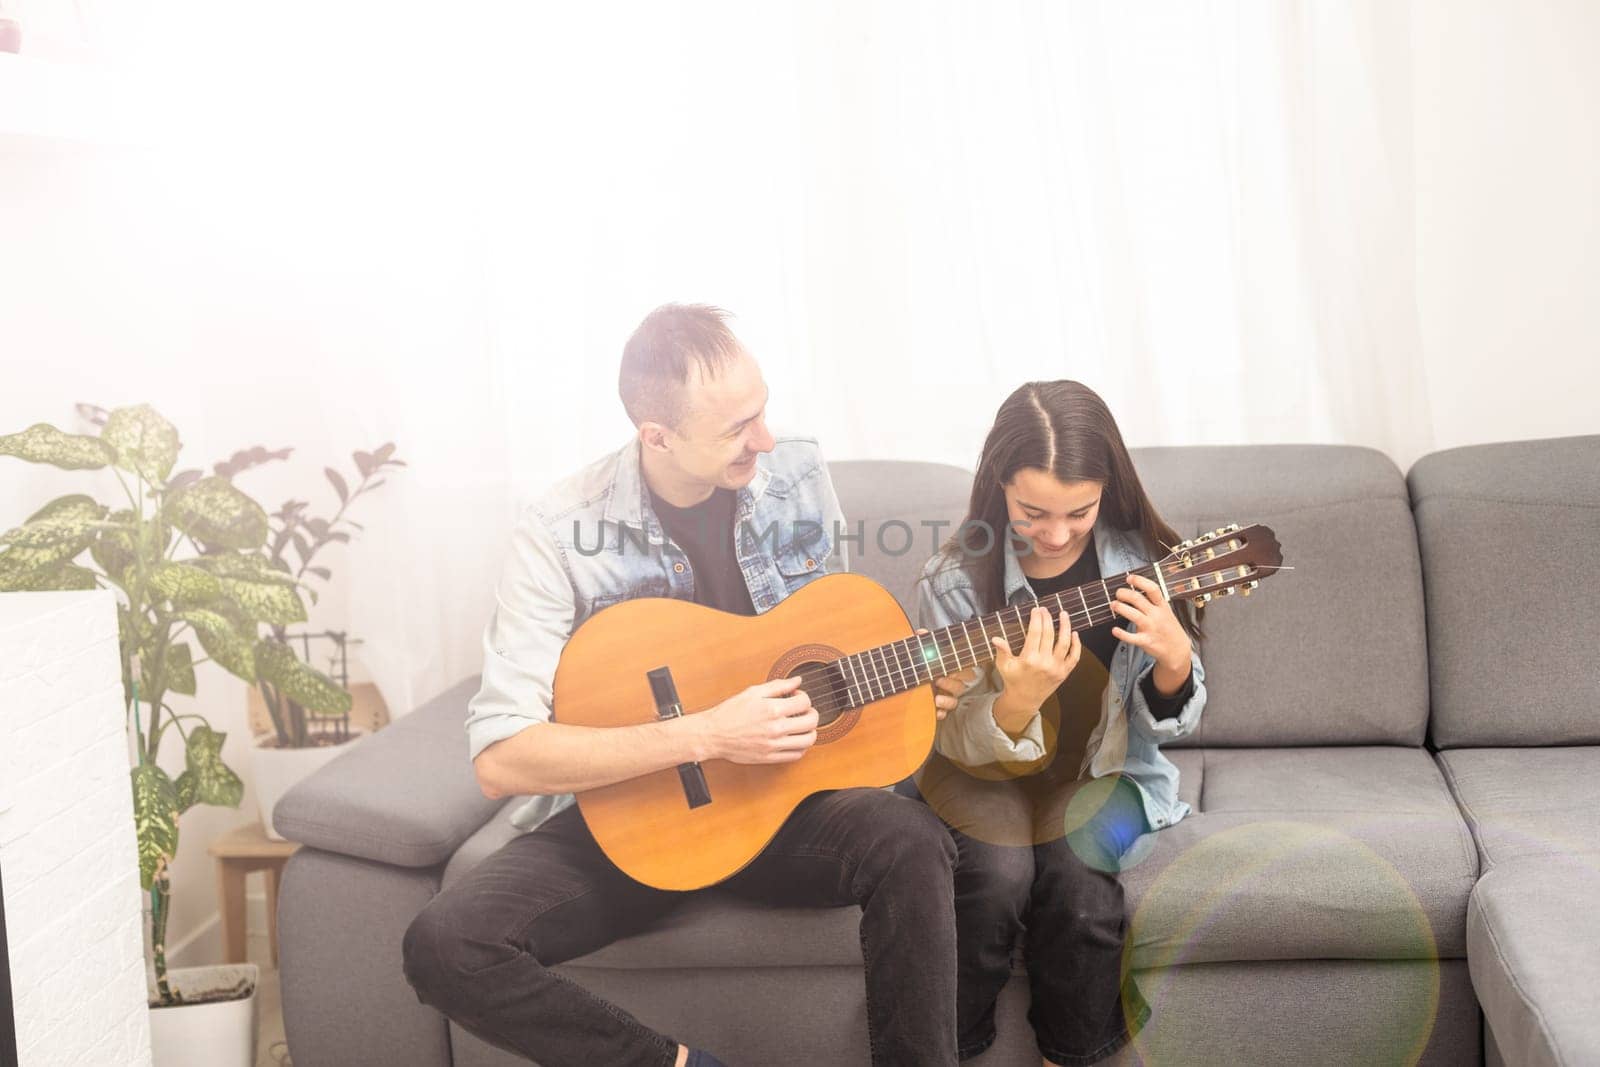 Father guy teaching girl teenager daughter guitar playing at home. Family musical lessons with strings instrument by Andelov13